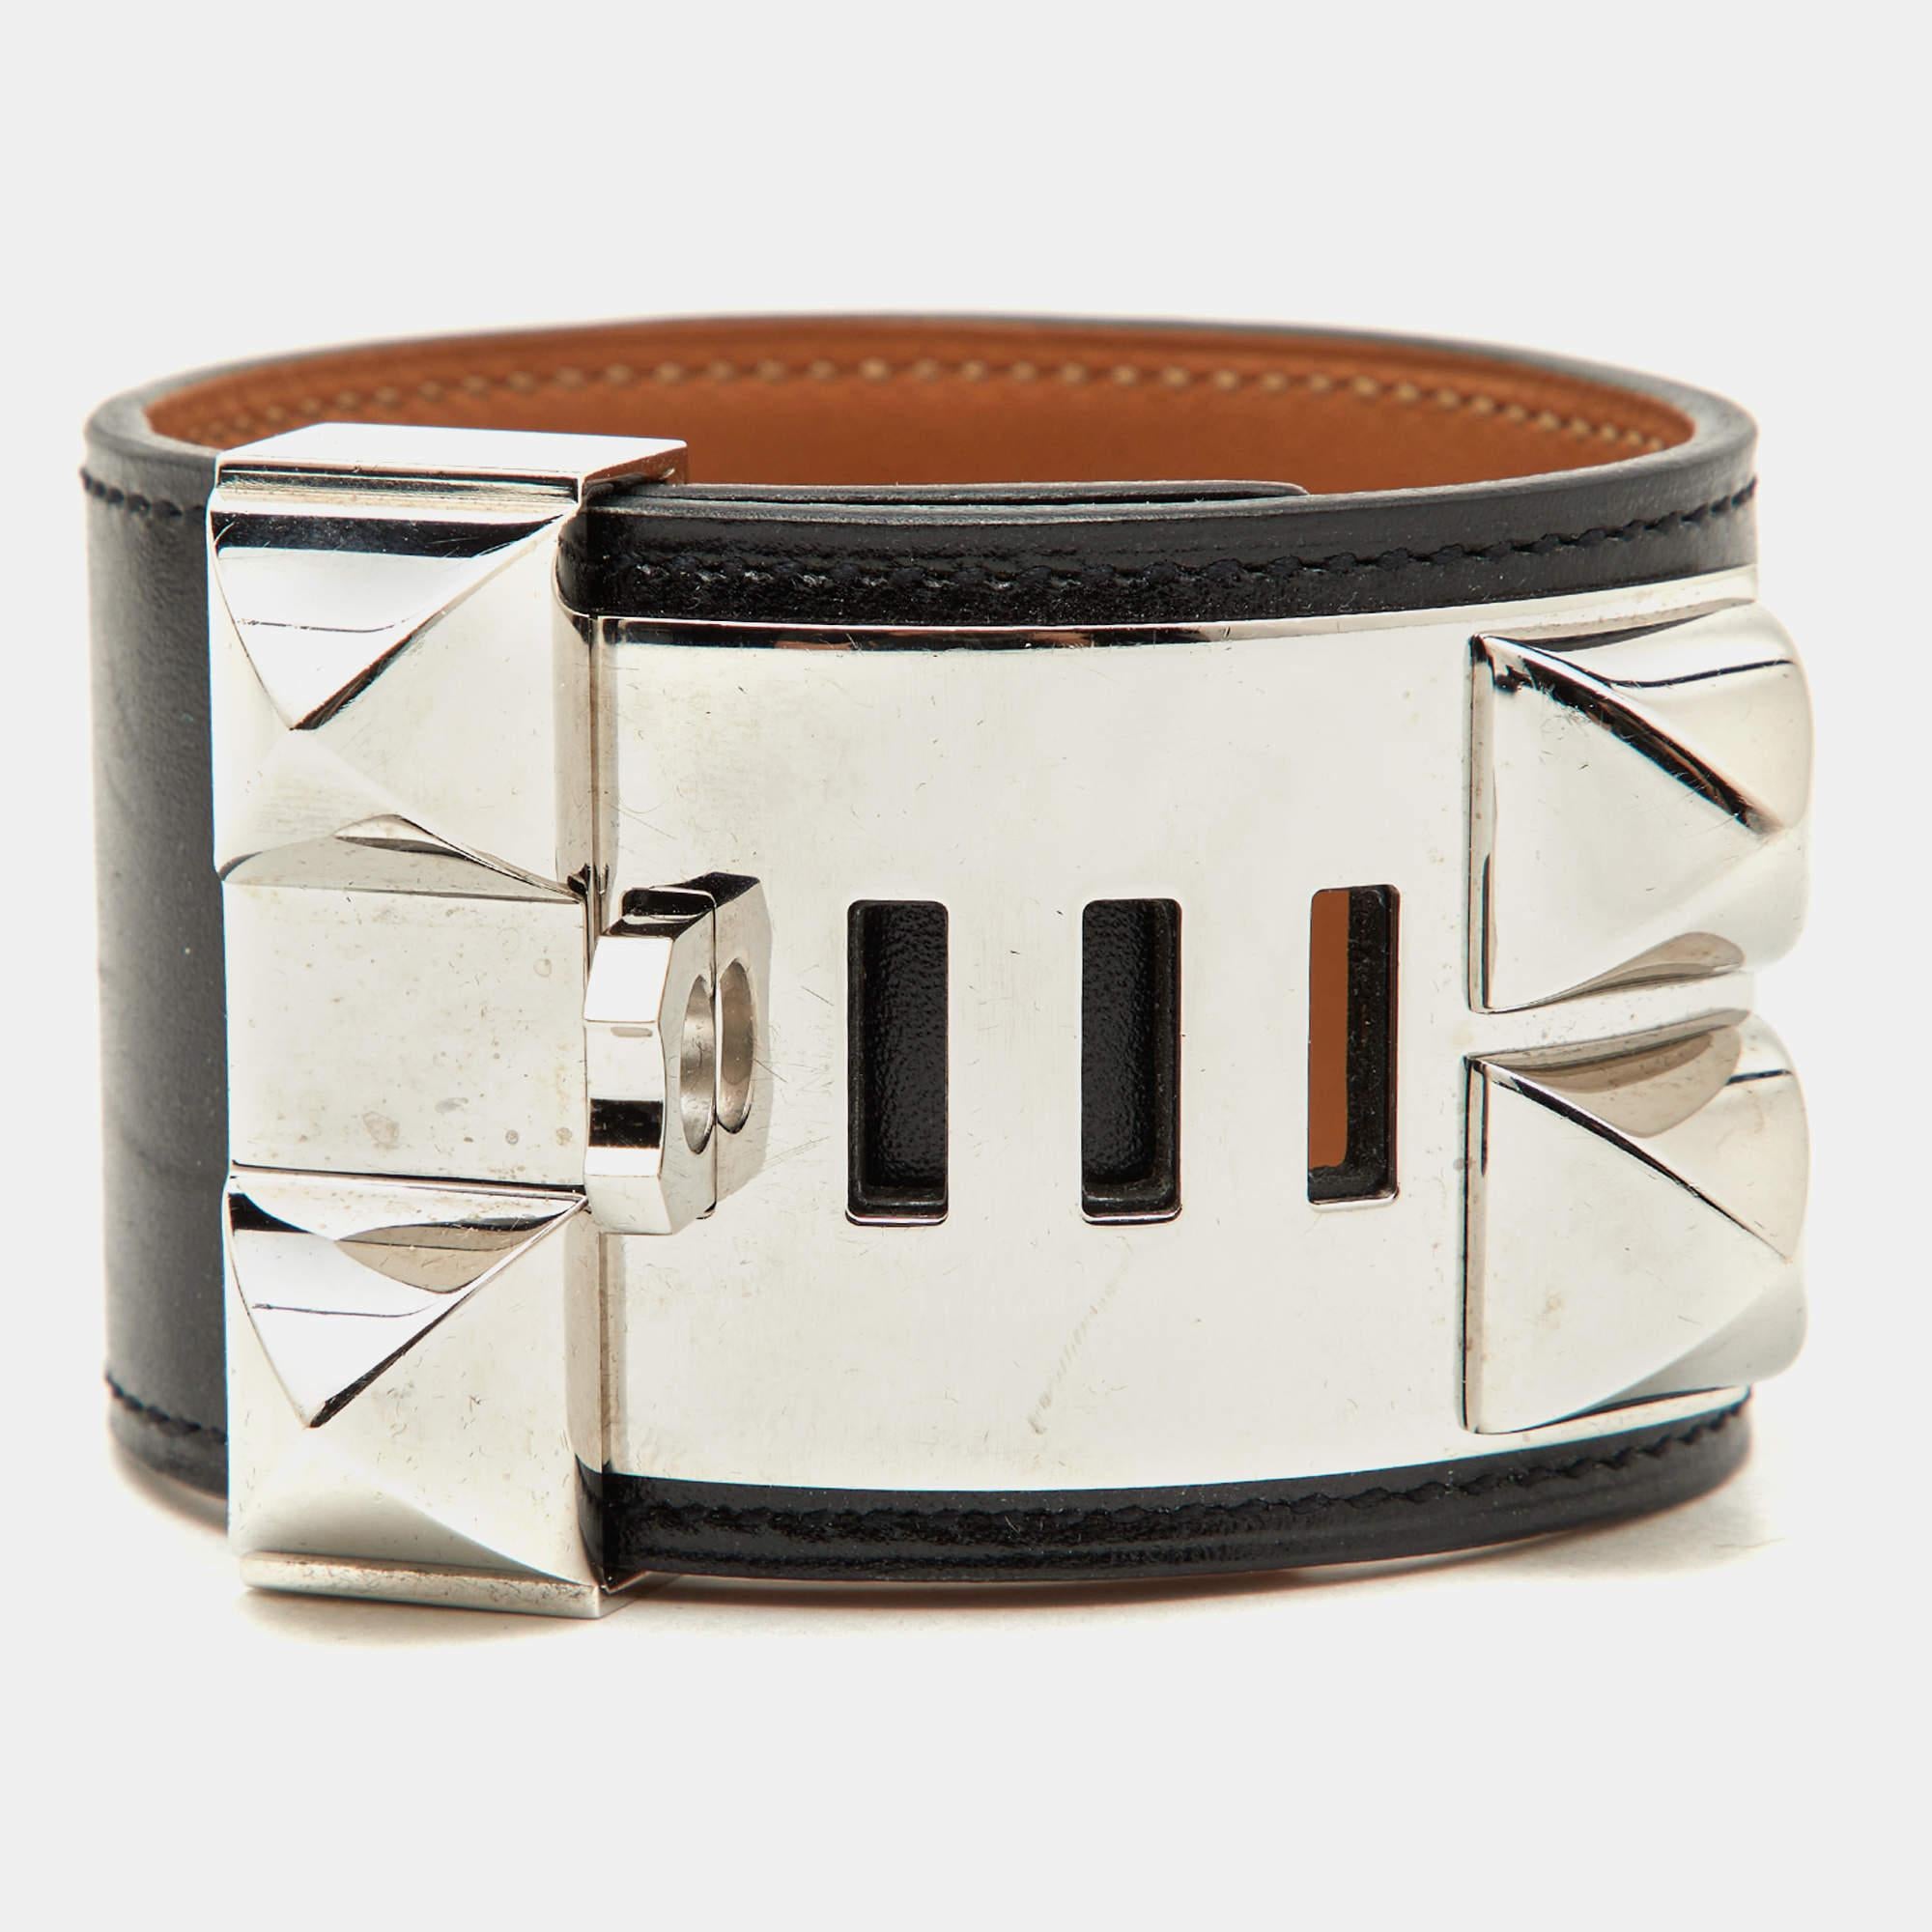 This instantly recognizable bracelet is from the signature Collier de Chien collection by Hermès. The bracelet, made of black leather, is adorned with the iconic Collier de Chien motif in palladium-plated metal involving pyramid studs and a ring. It